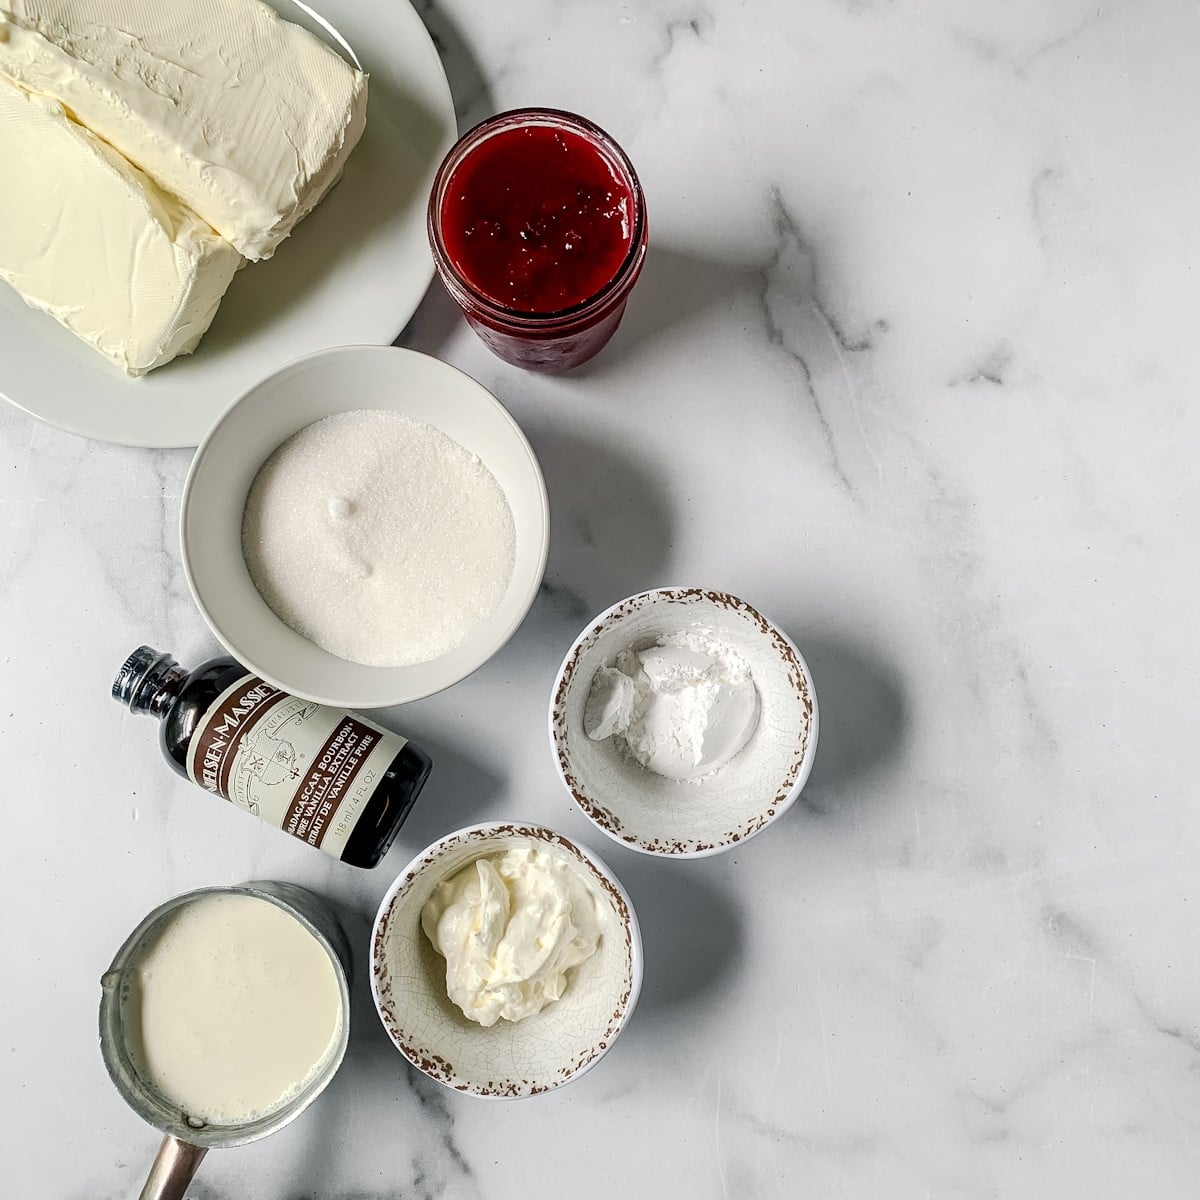 Ingredients for a no bake cherry cheesecake recipe.